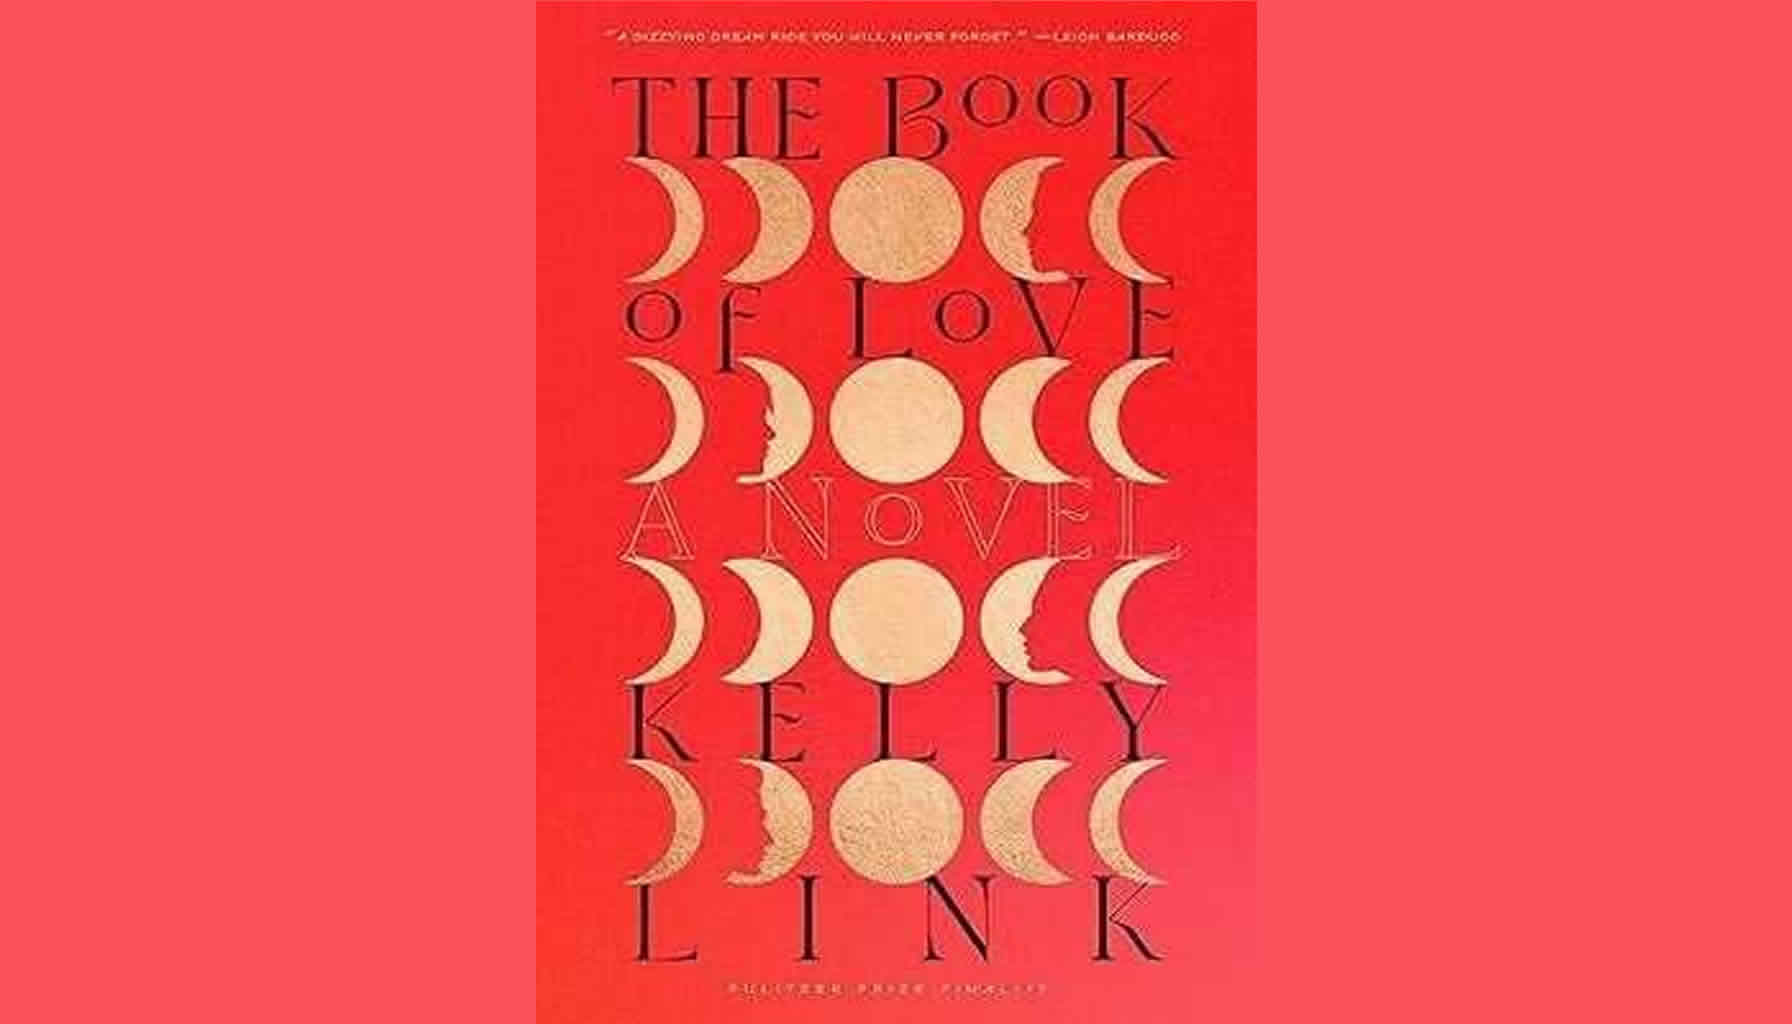 THE BOOK OF LOVE: KELLY LINK DEBUT NOVEL